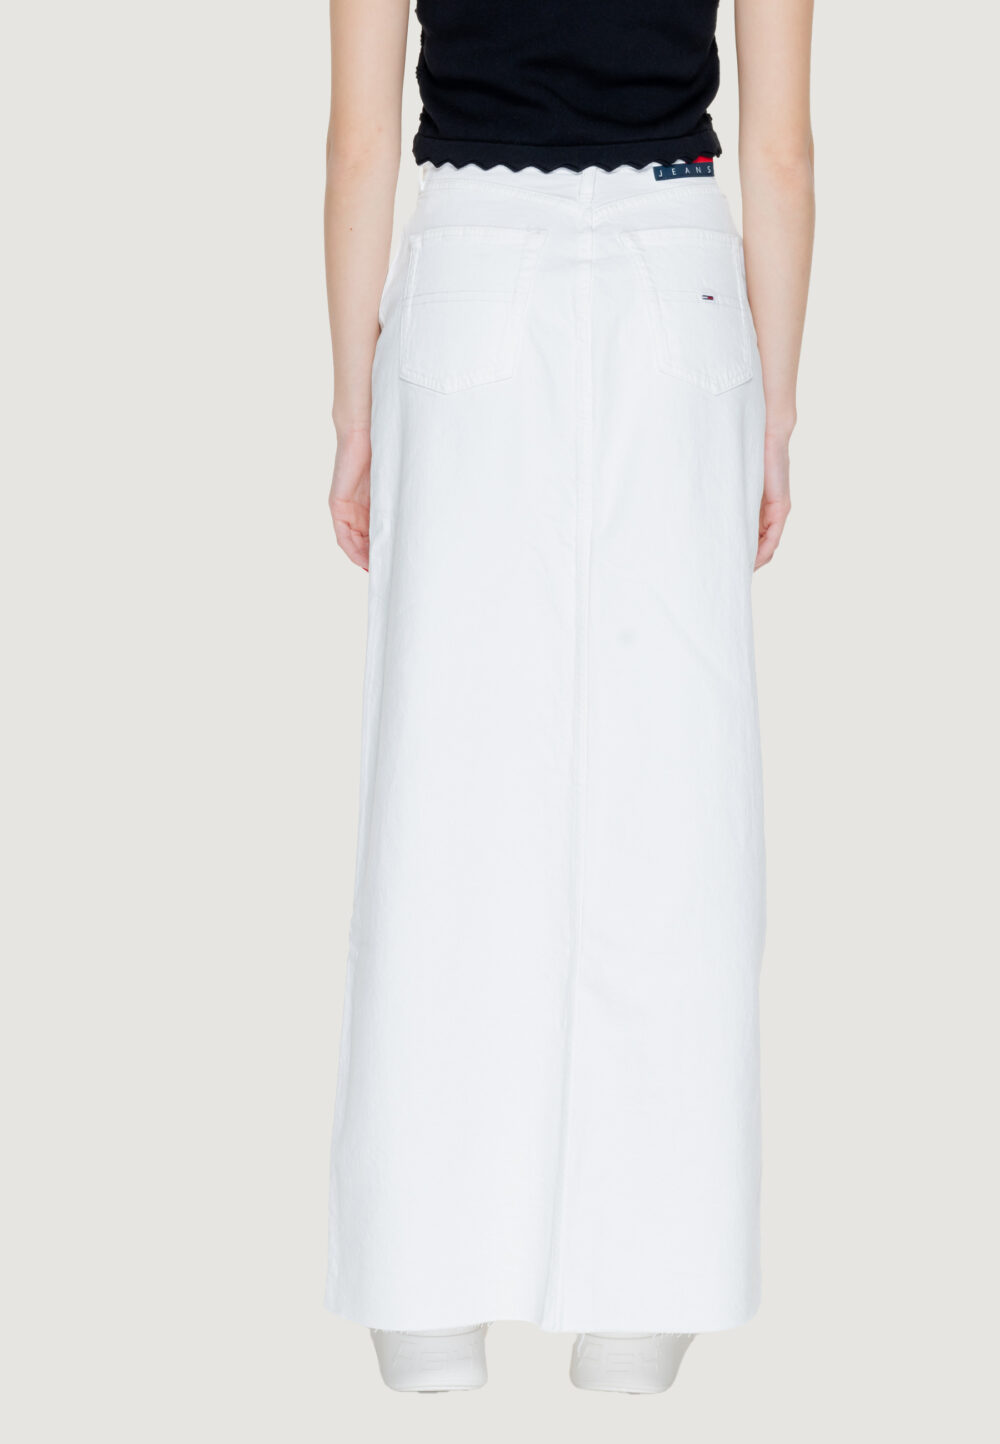 Gonna lunga Tommy Hilfiger Jeans CLAIRE HGH MAXI Bianco - Foto 2